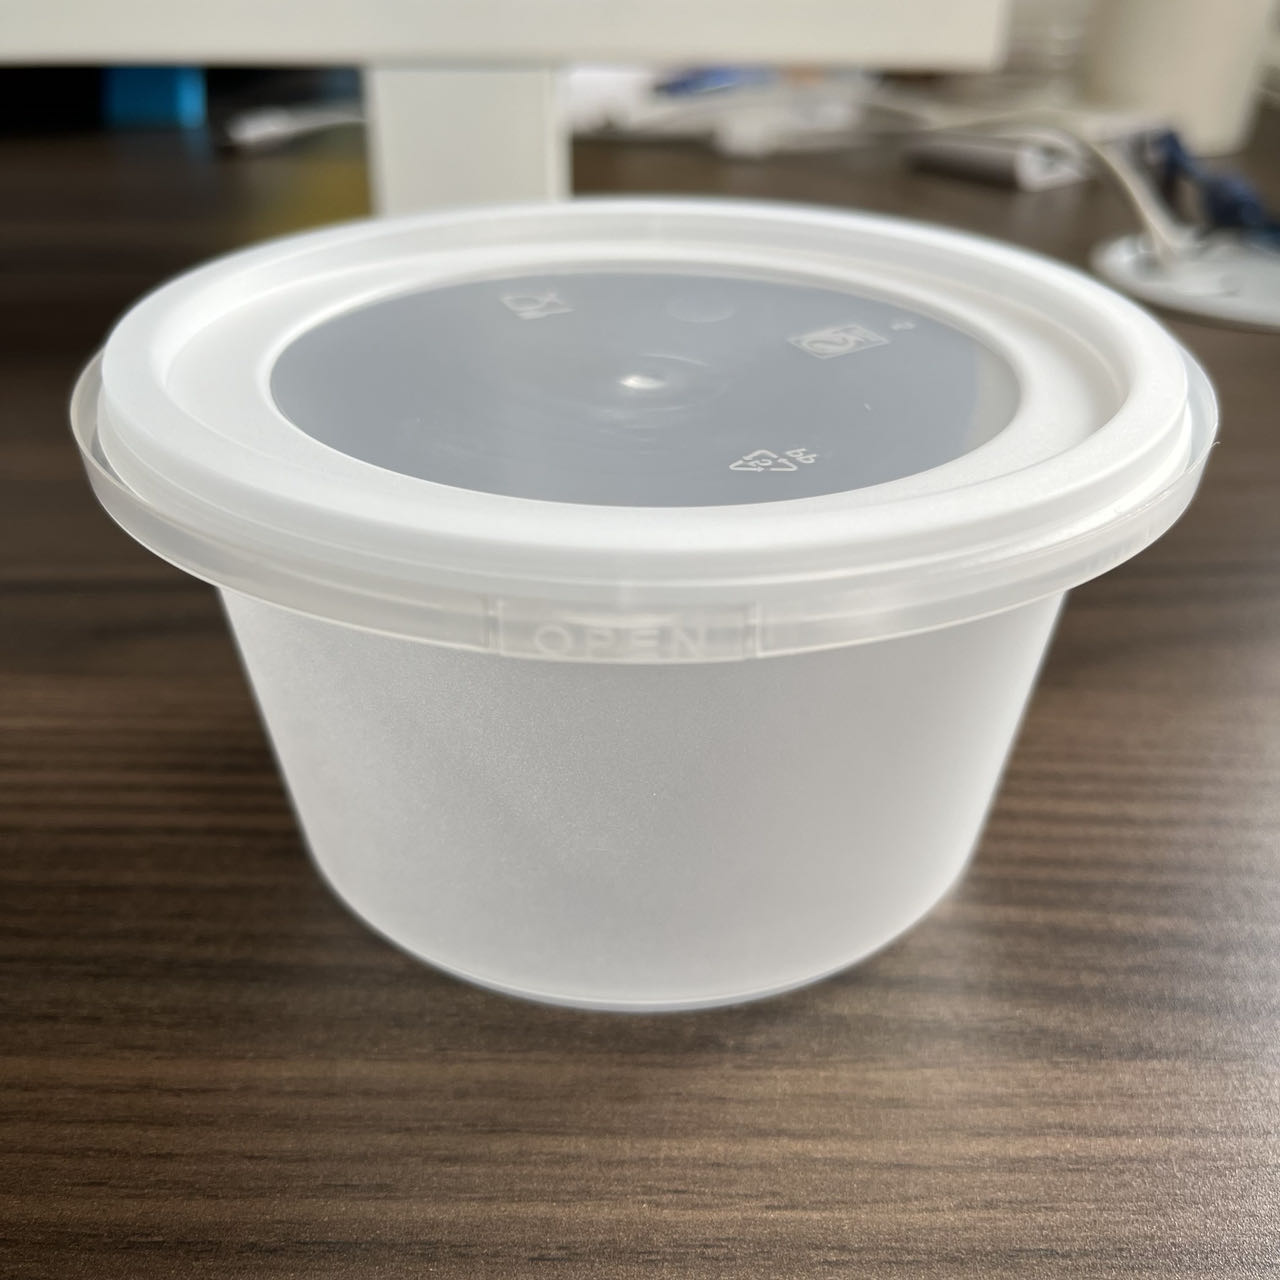 China’s Disposable Box Industry Revolutionizes Takeout Experience with Innovative Plastic Containers/